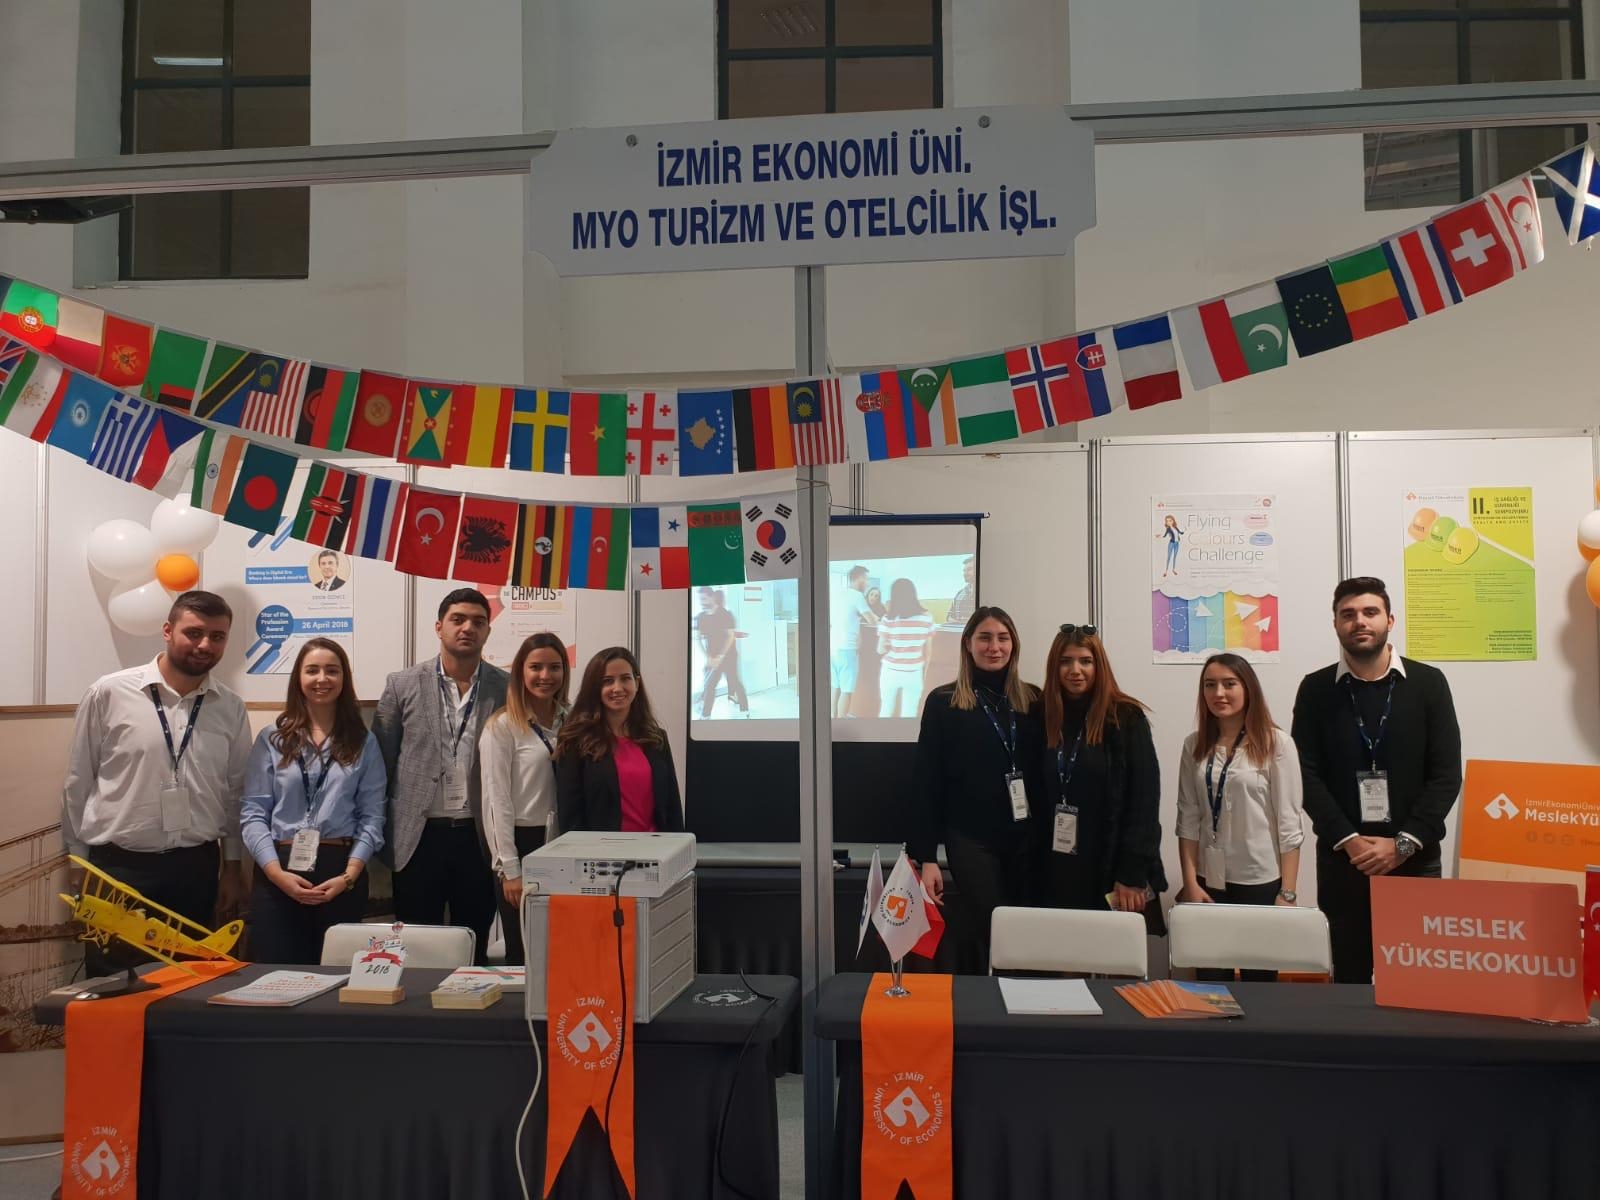 IUE ATTENDS THE 12th TRAVEL TURKEY FAIR AND INTERNATIONAL GASTRONOMIC TOURISM CONGRESS